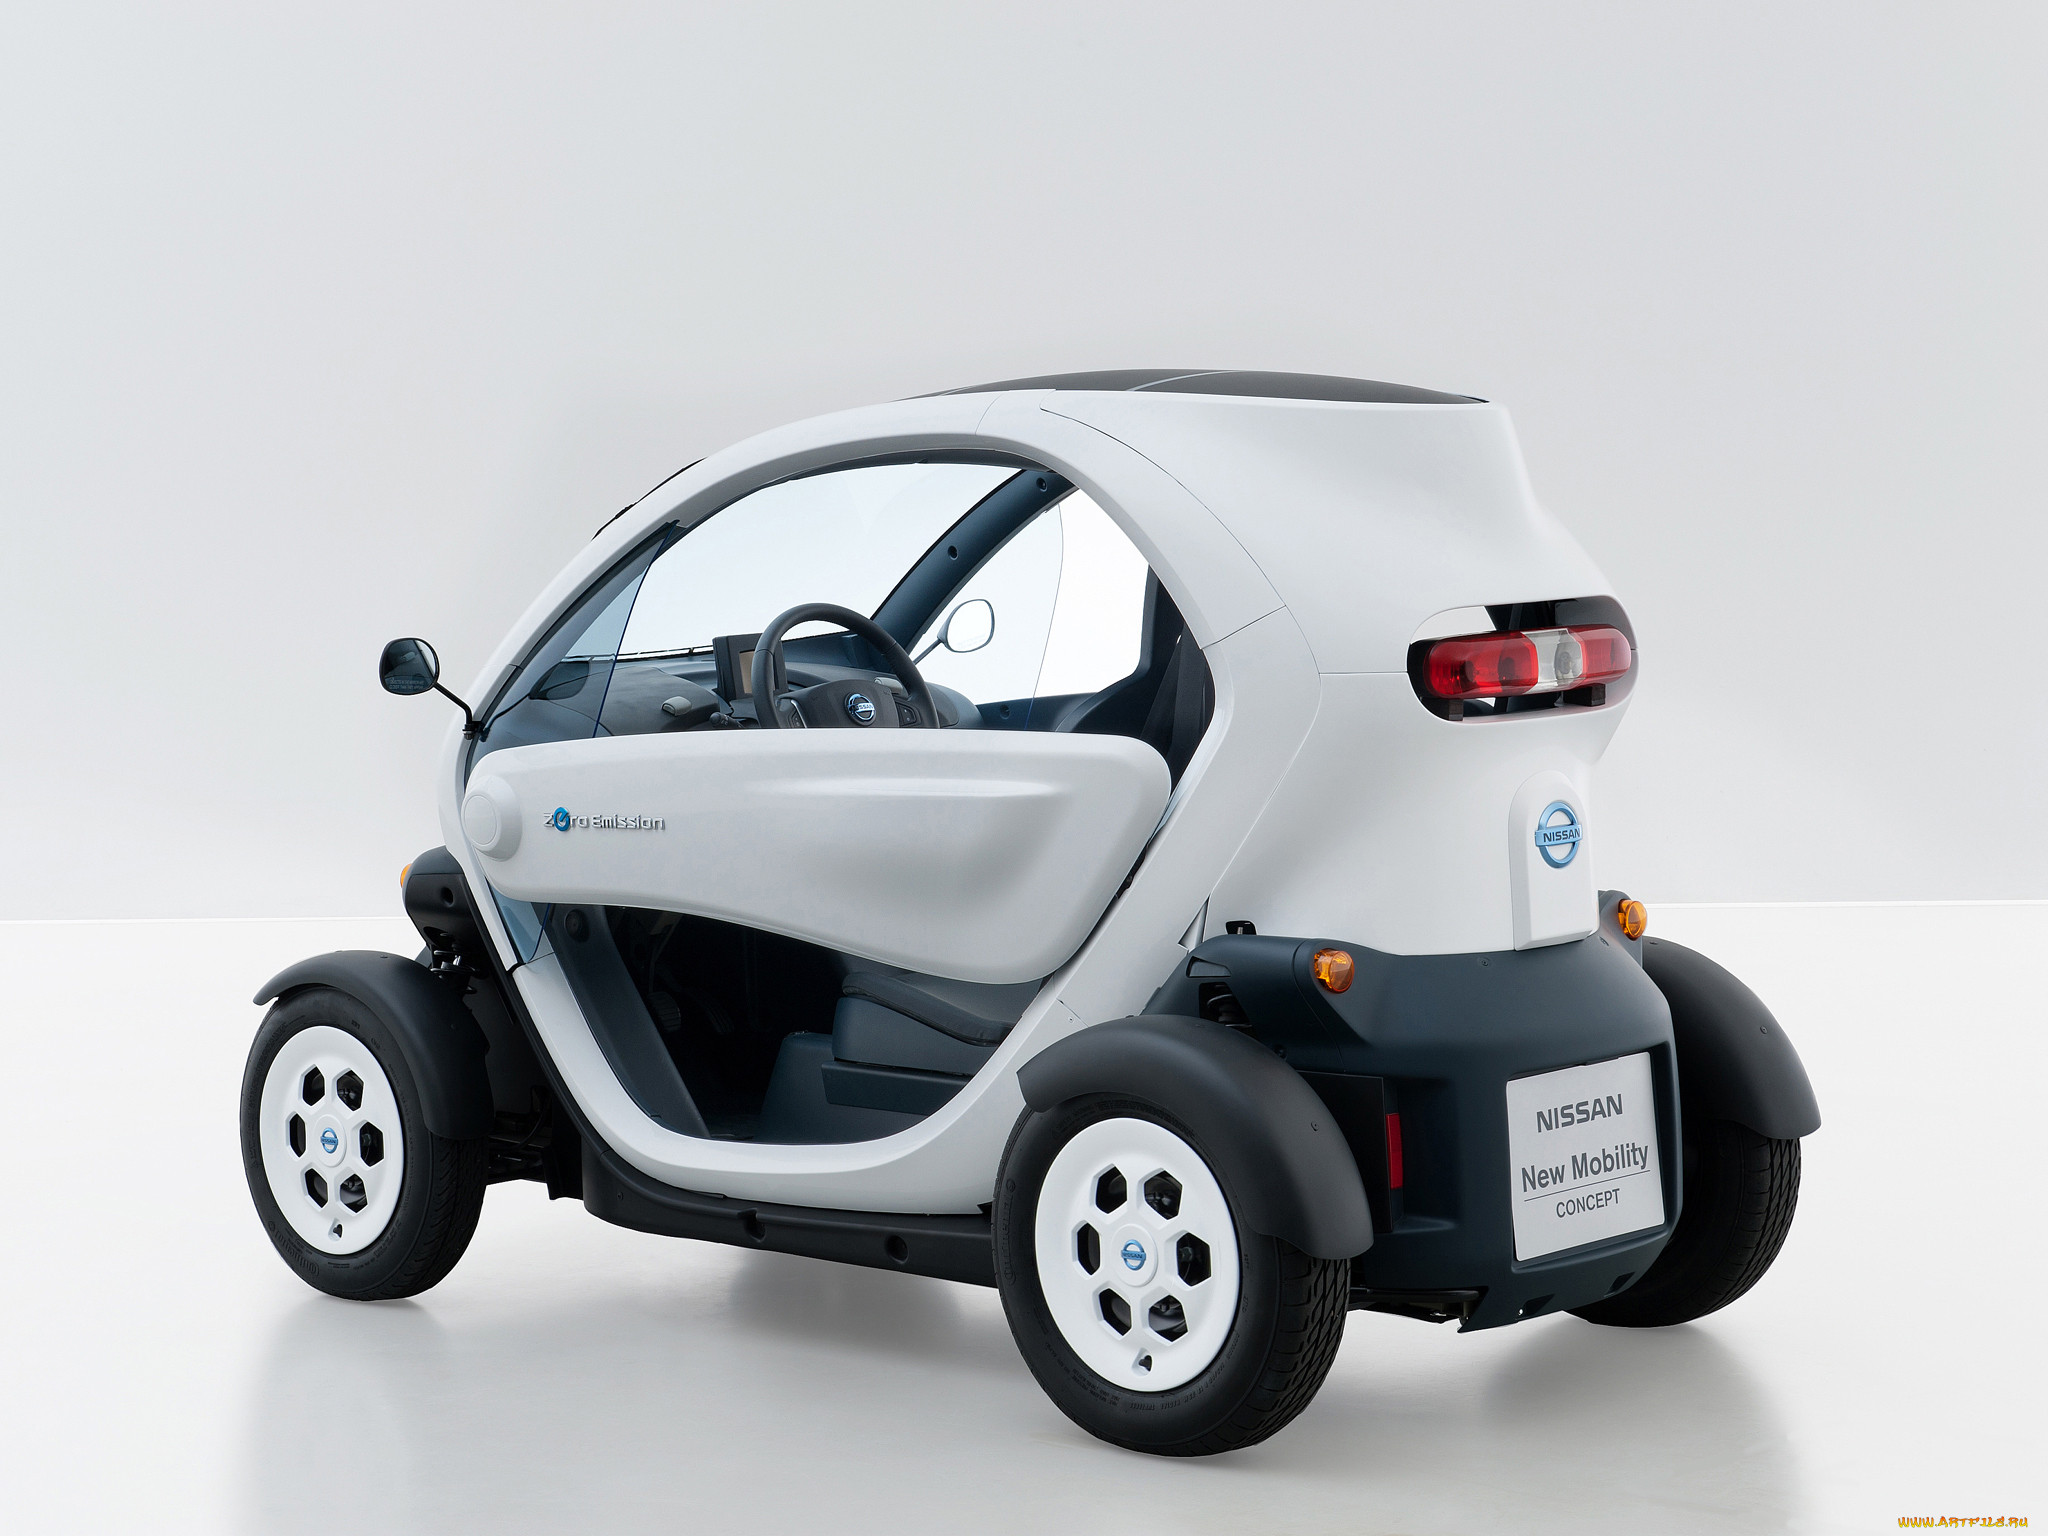 nissan new mobility concept 2011, , nissan, datsun, 2011, concept, new, mobility